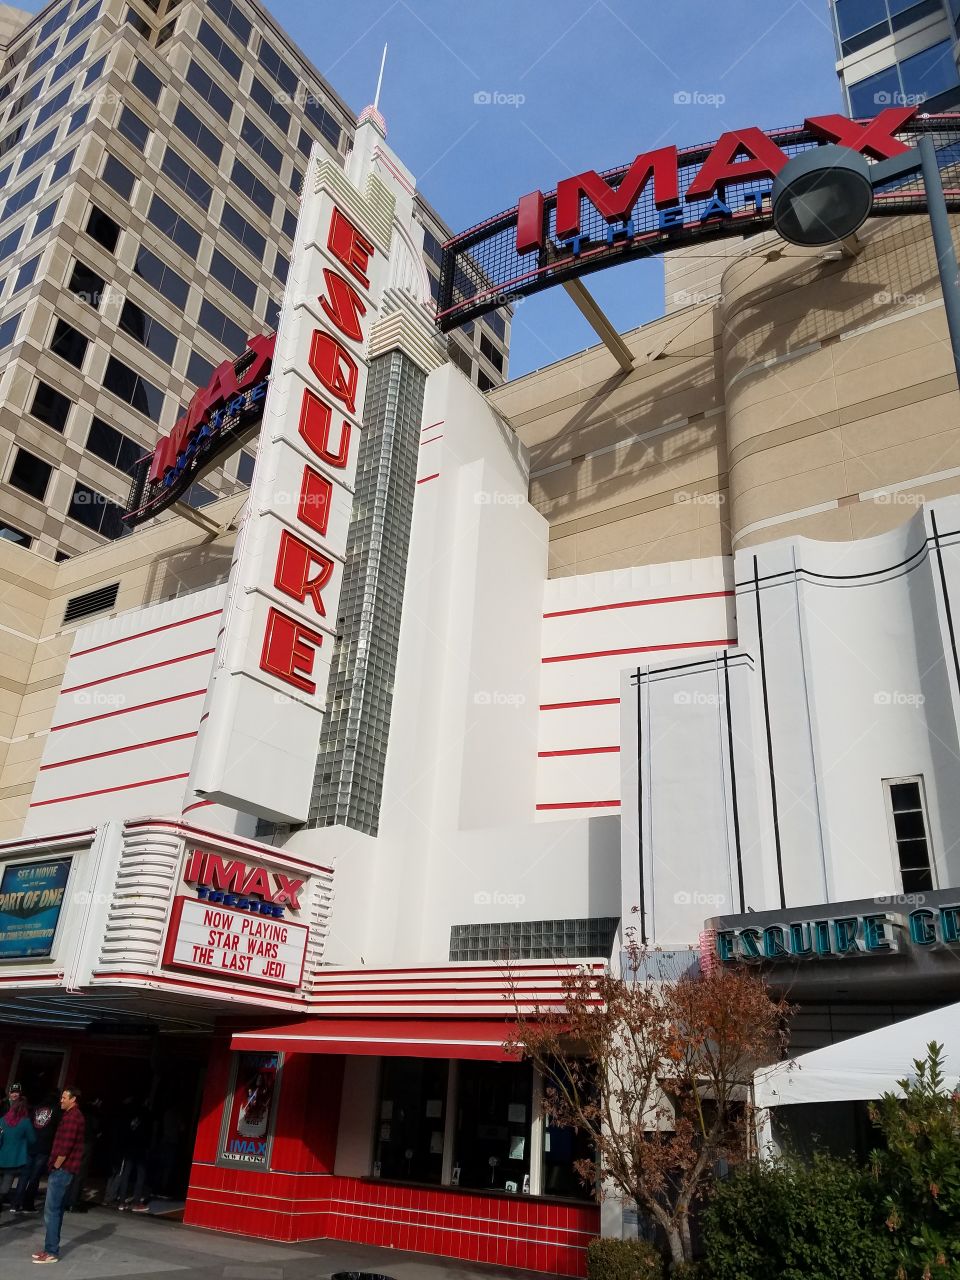 Star Wars The Last Jedi in 3D at the IMAX theatre in downtown